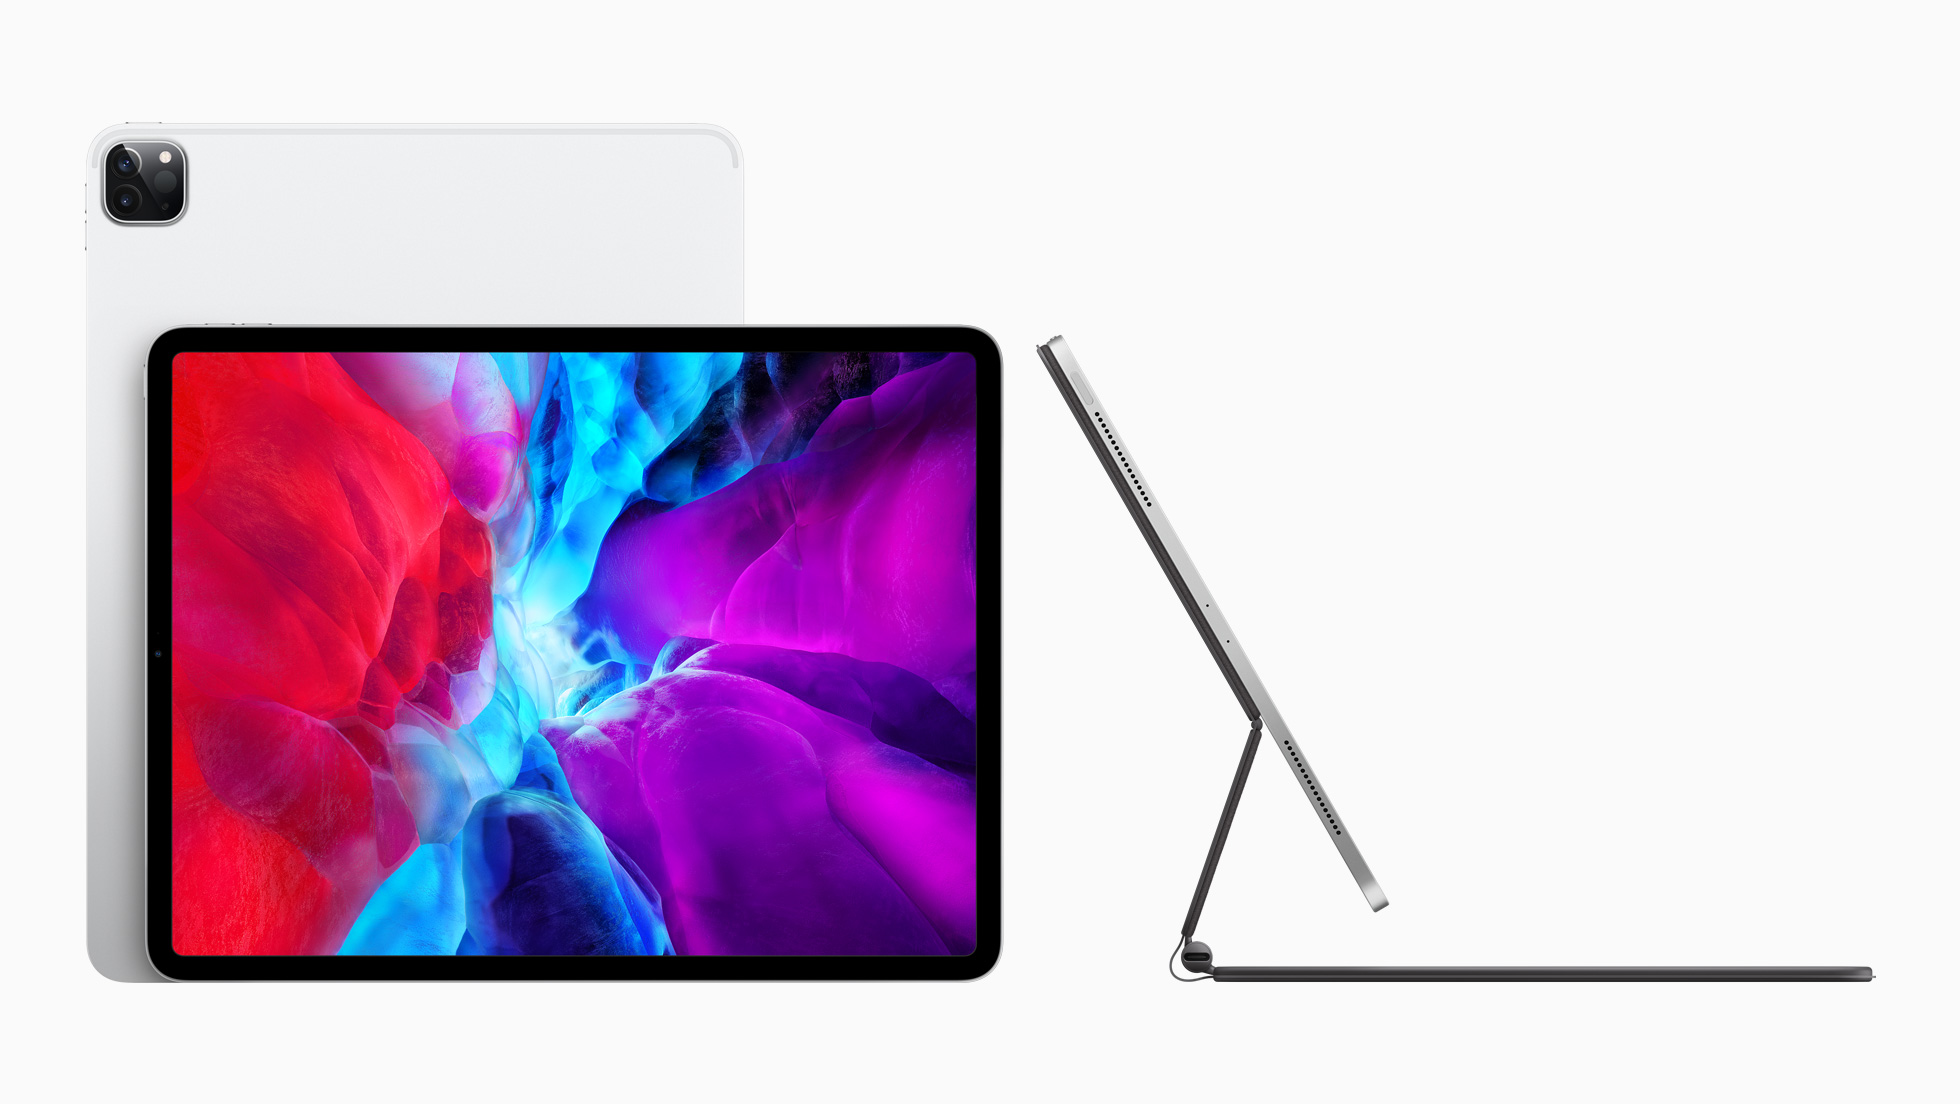 Apple unveils new iPad Pro with breakthrough LiDAR Scanner and brings trackpad support to iPadOS